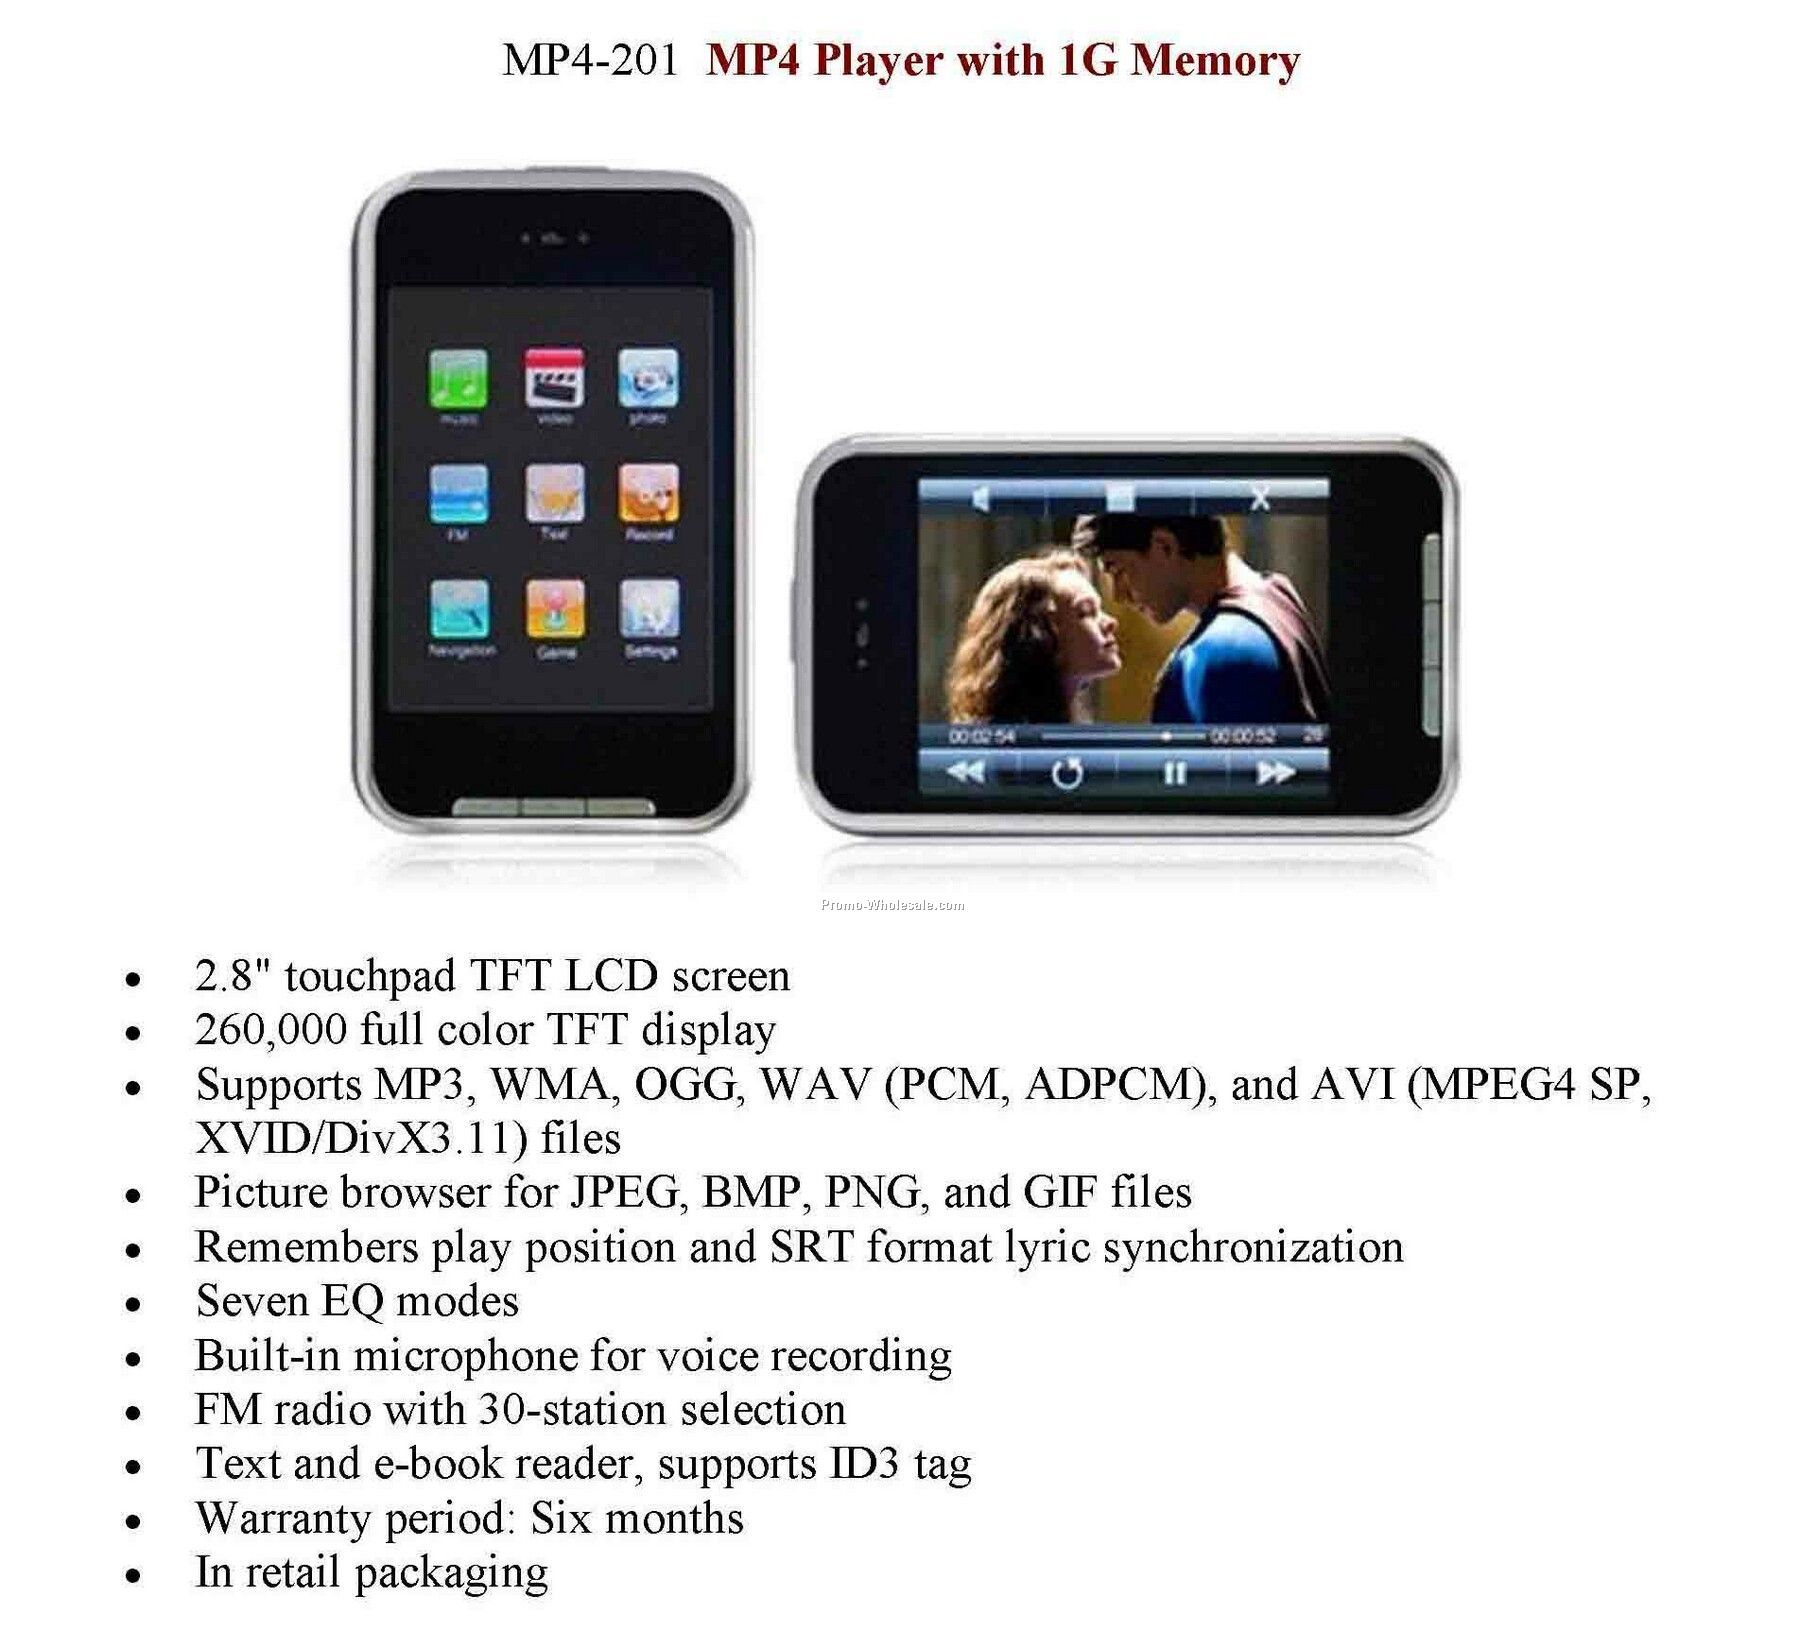 Mp4, Mp3, Video Music Player, With 1g Memory, Voice Recorder